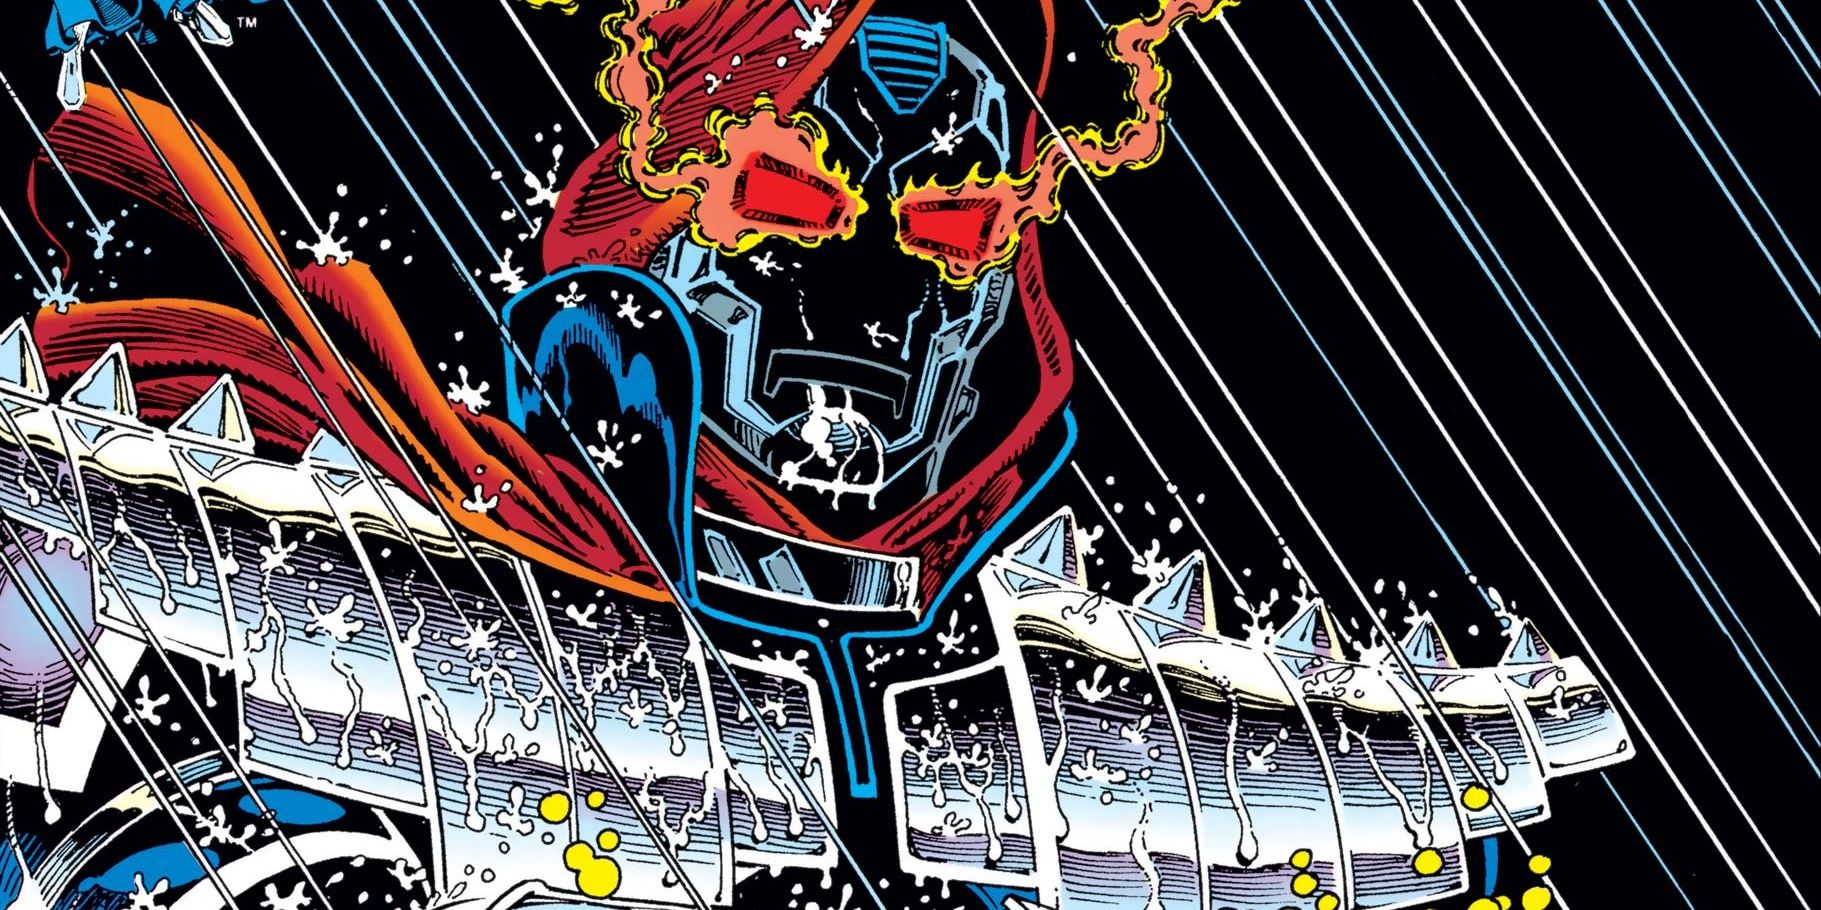 Marvel The 10 Most Powerful Heroes Of Marvel 2099 Ranked